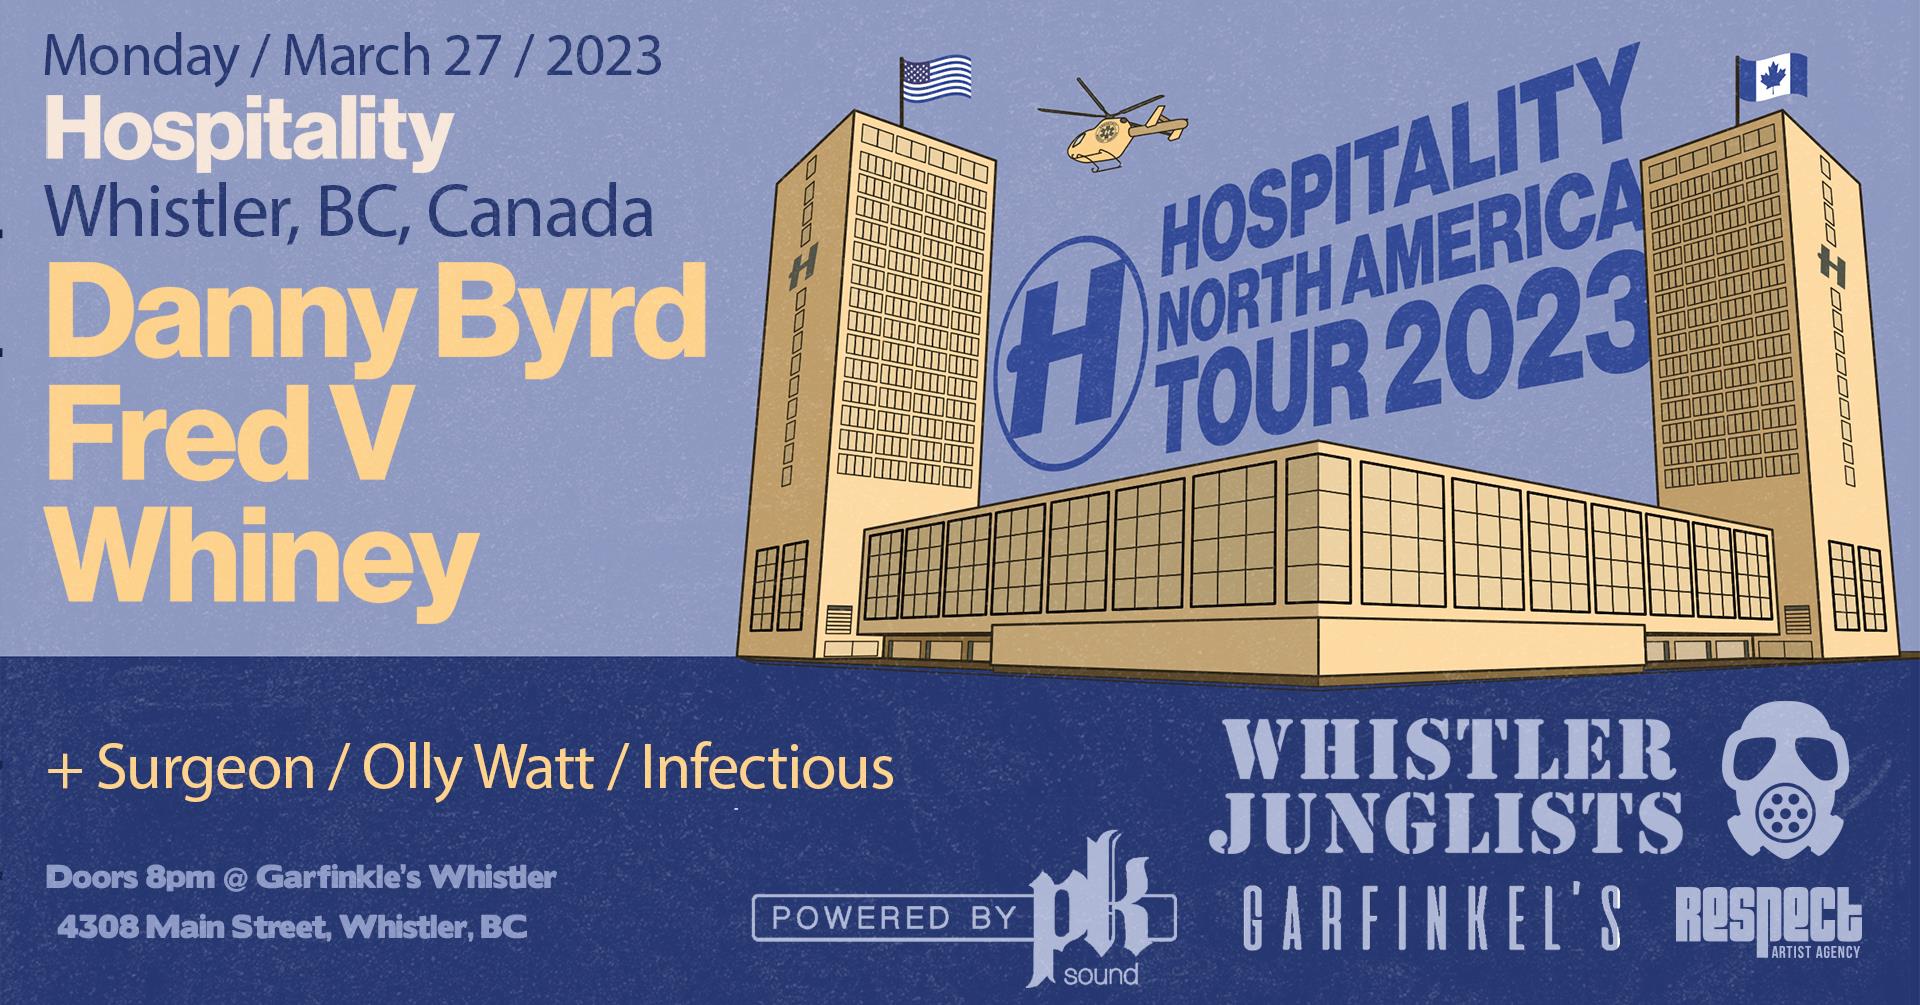 Whistler Junglists - Hospitality Tour